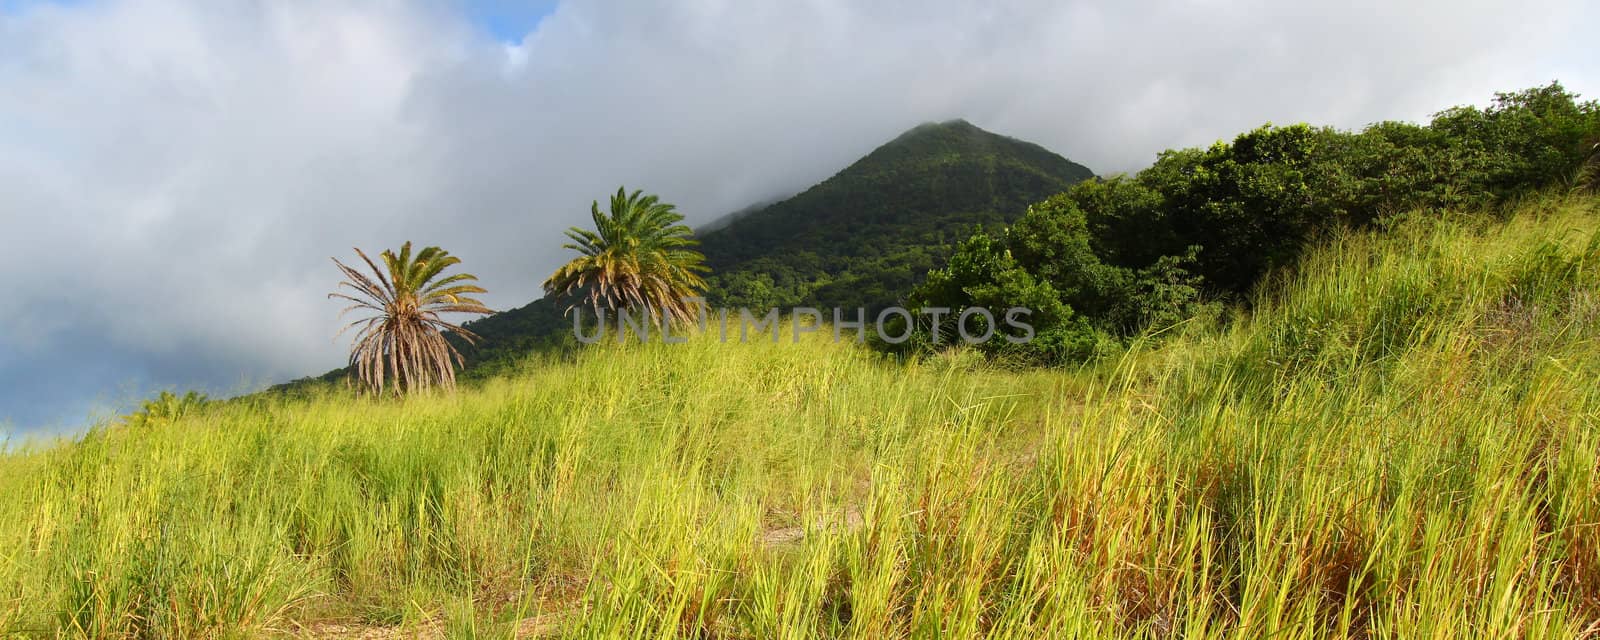 View of Mount Liamuiga from the sugar cane fields of Saint Kitts.